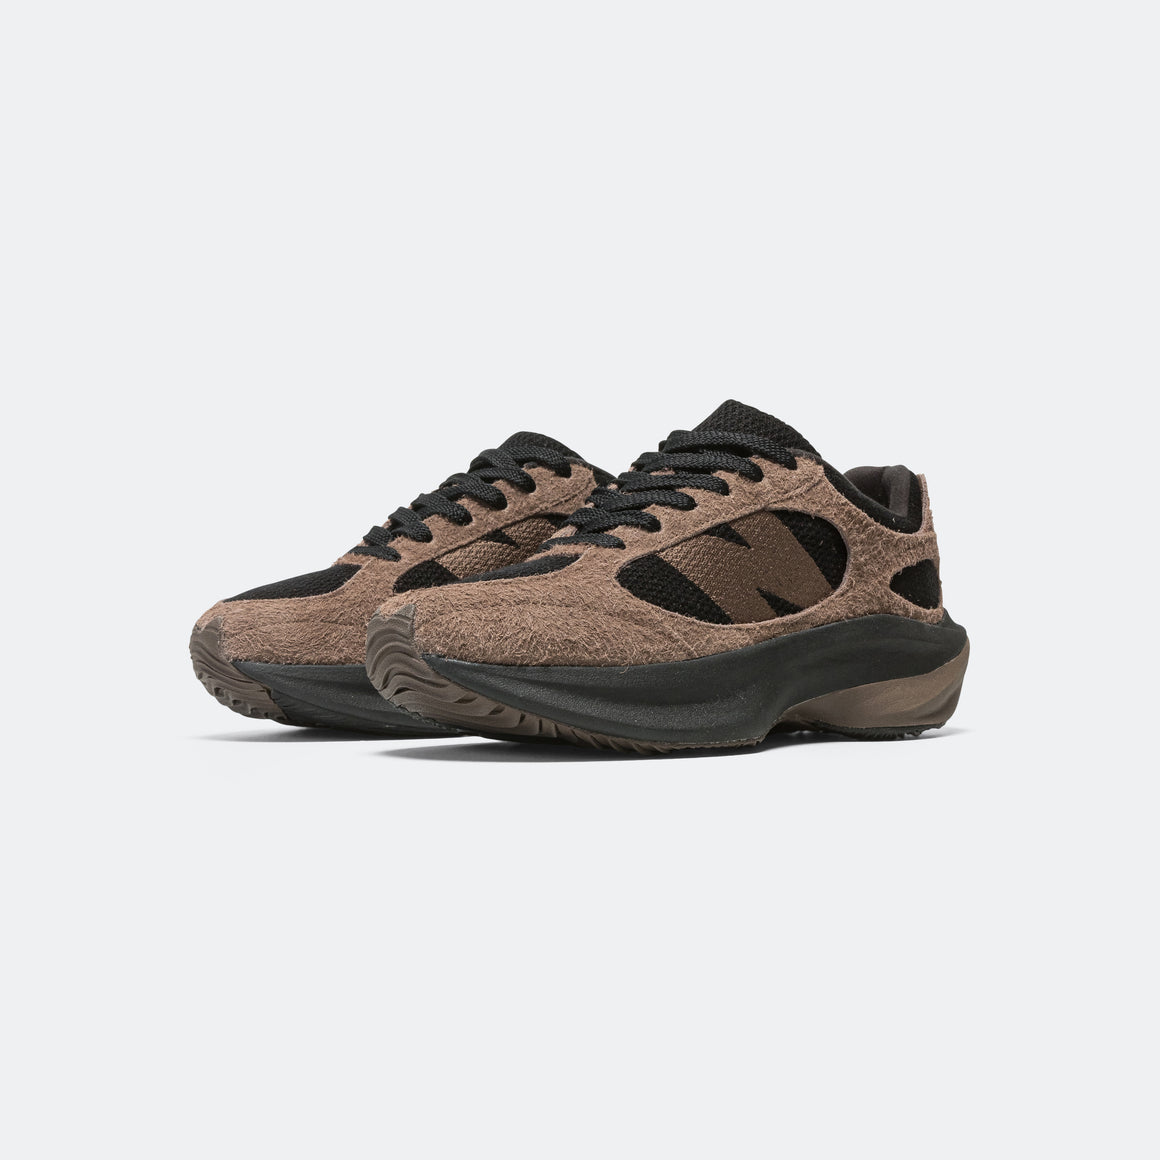 New Balance - WRPD RUNNER - True Brown - UP THERE